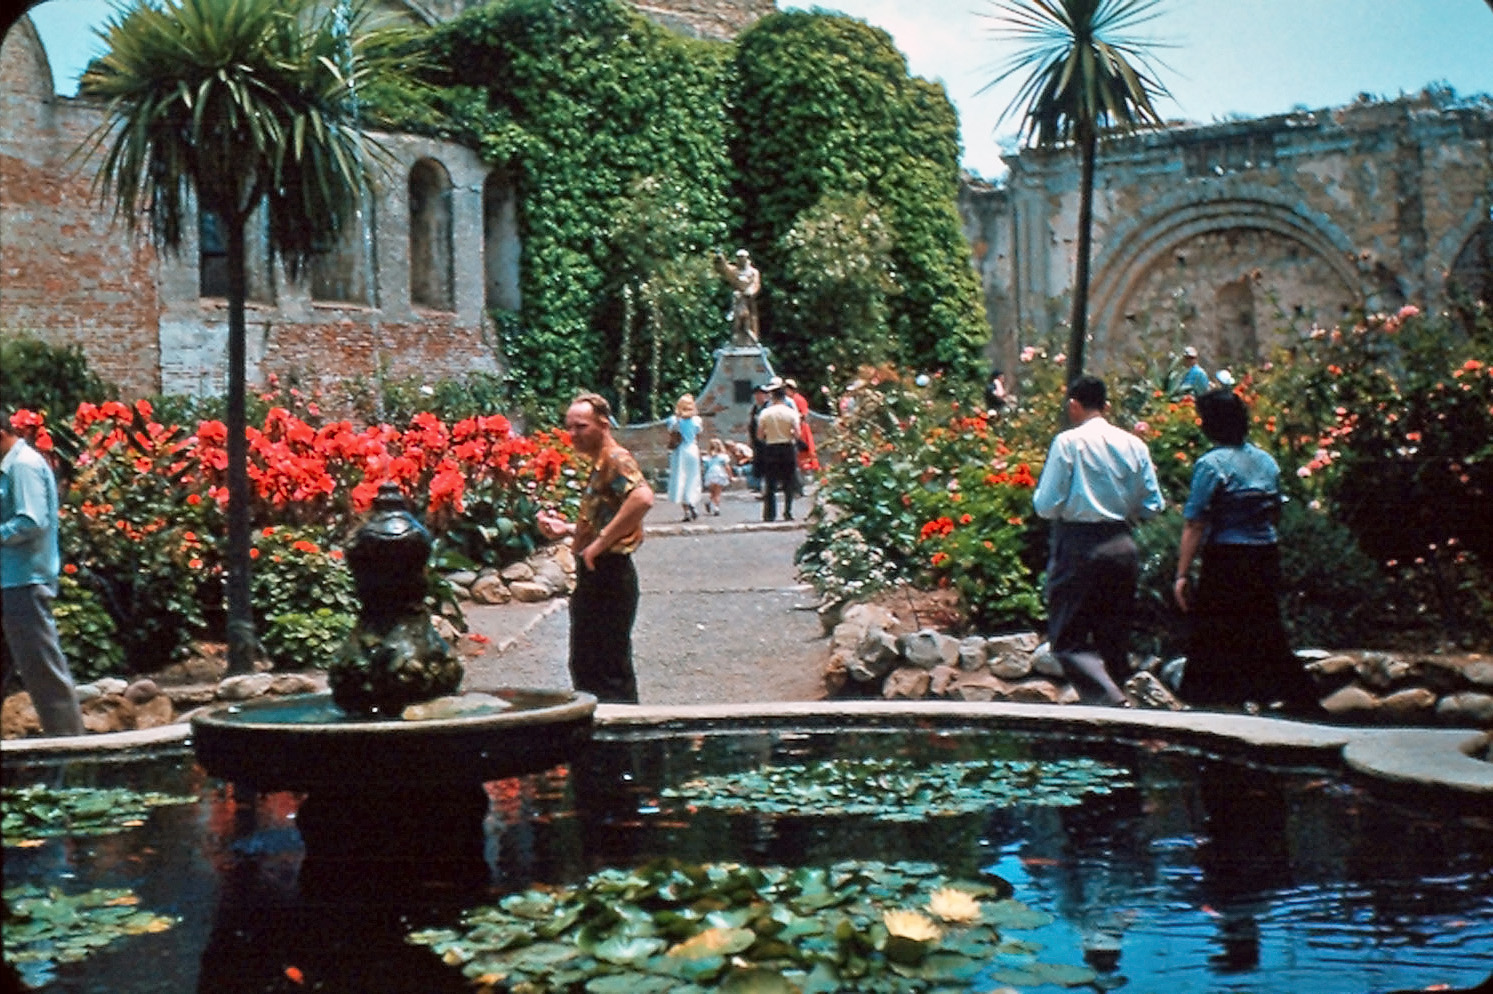 Somewhere in California circa 1950's, a mission perhaps? One more slide from the Thrift Store. View full size.

[Mission San Juan Capistrano. - tterrace]